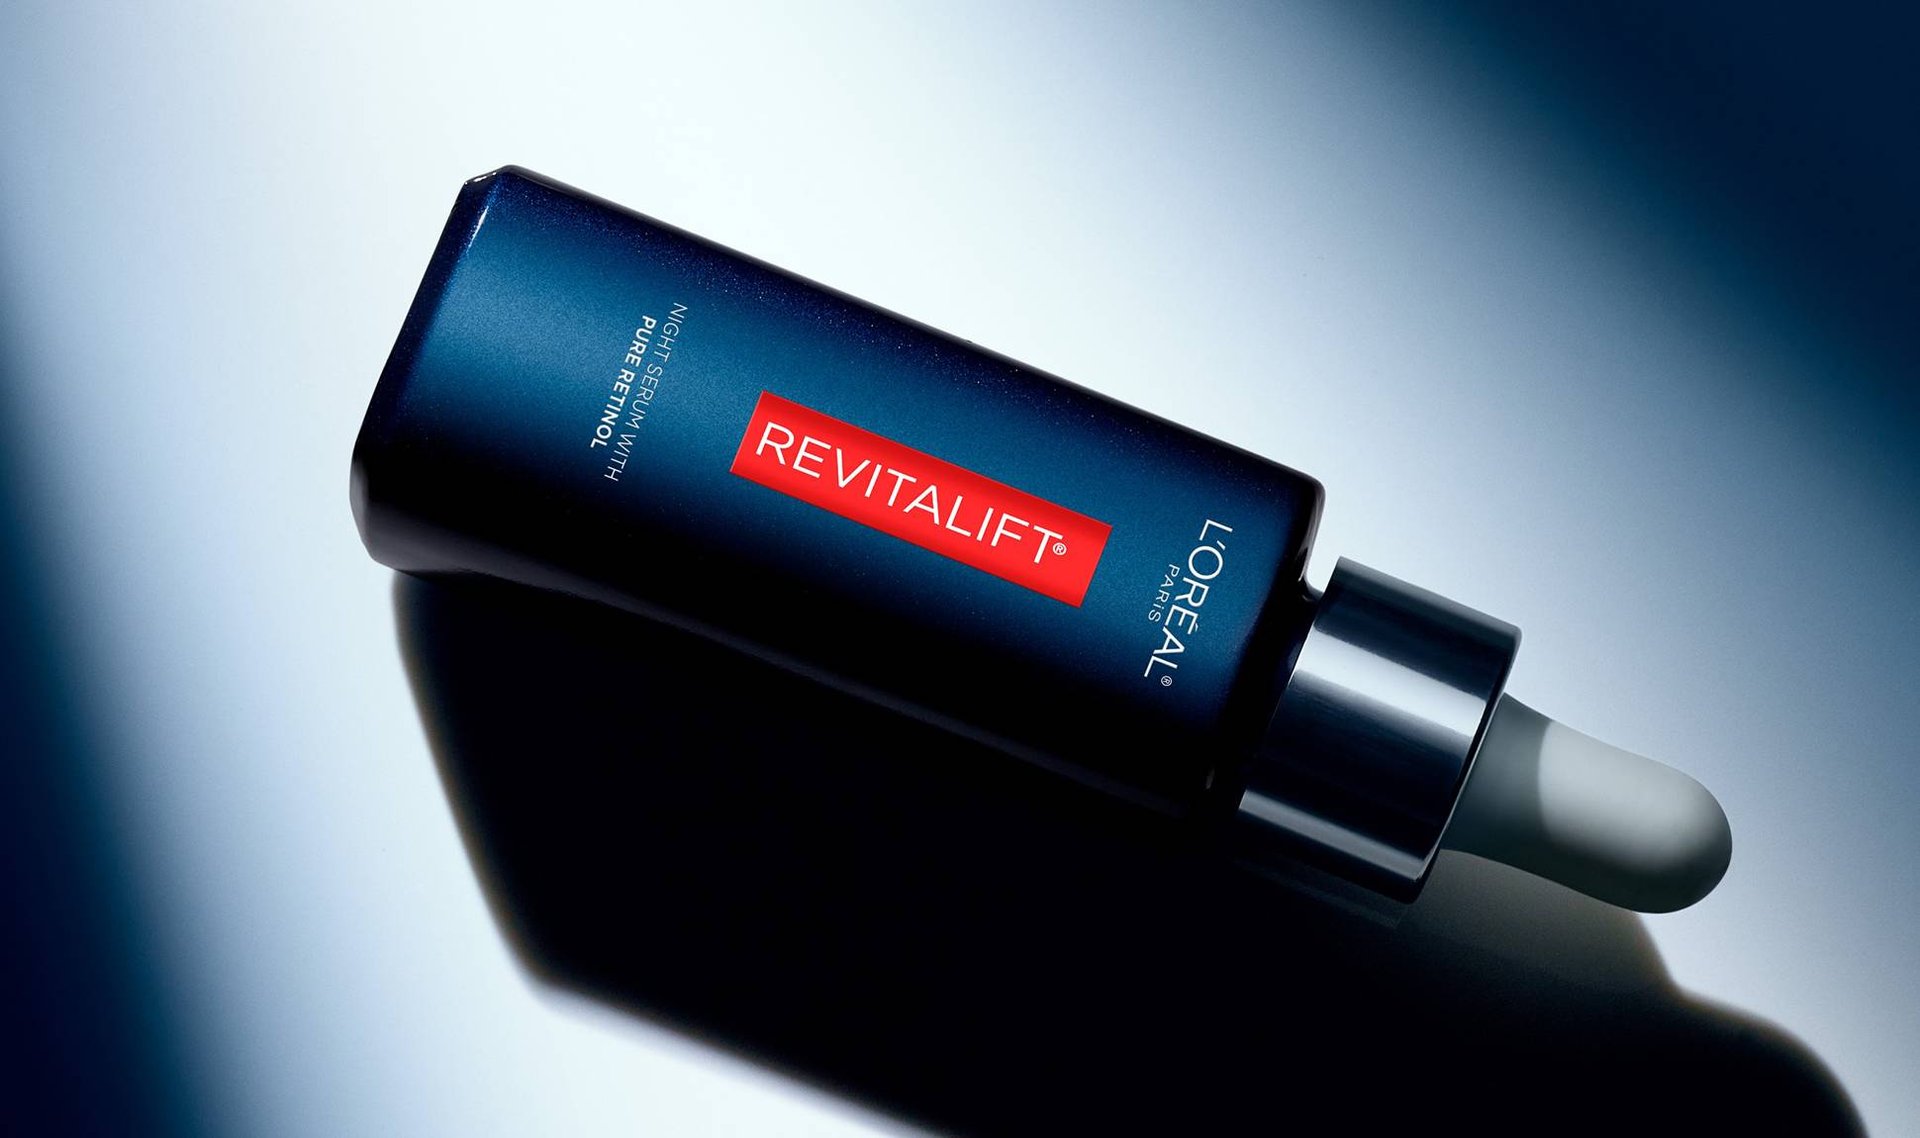 L’Oréal Paris Just Dropped Its Very First Drugstore Retinol Serum and We Can’t Wait to Get Our Hands on It